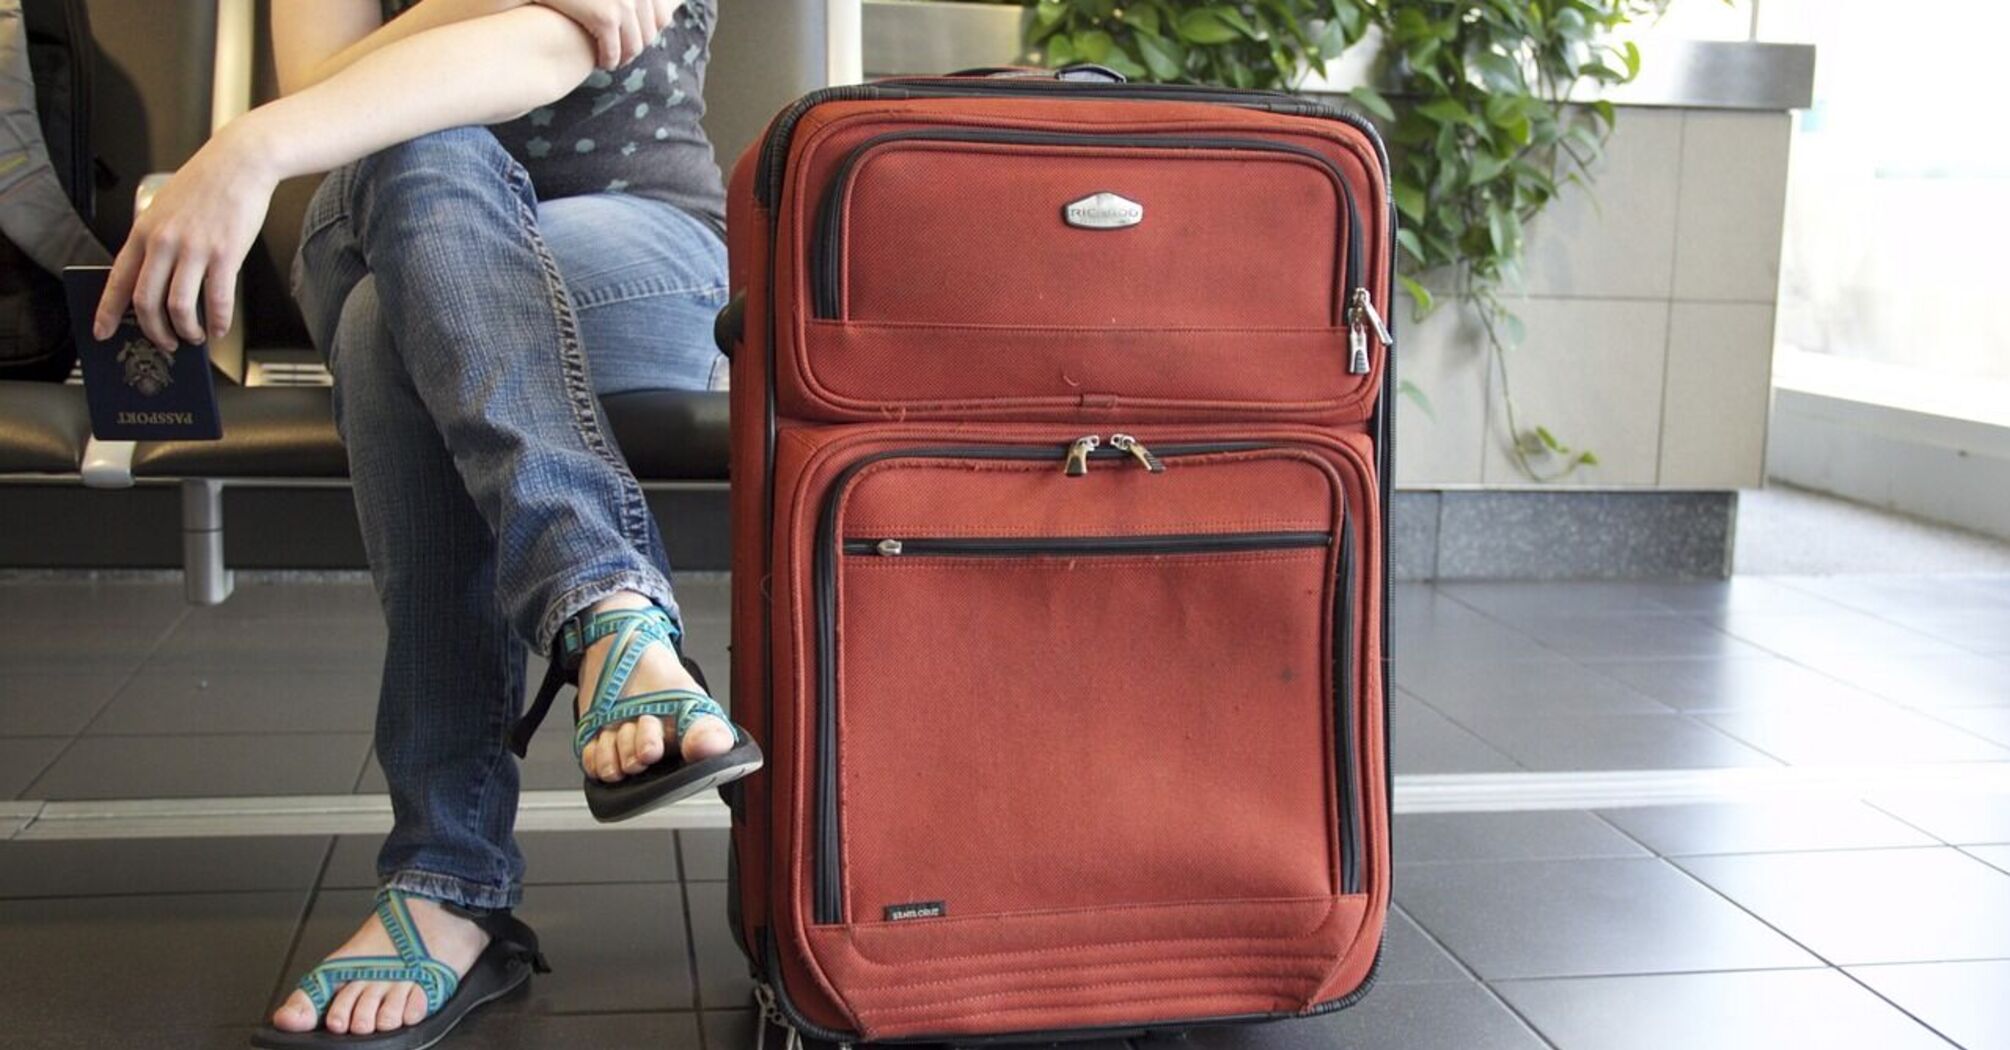 Pros and cons of hand luggage and checked baggage: differences in size, cost and comfort and what is the benefit for the passenger